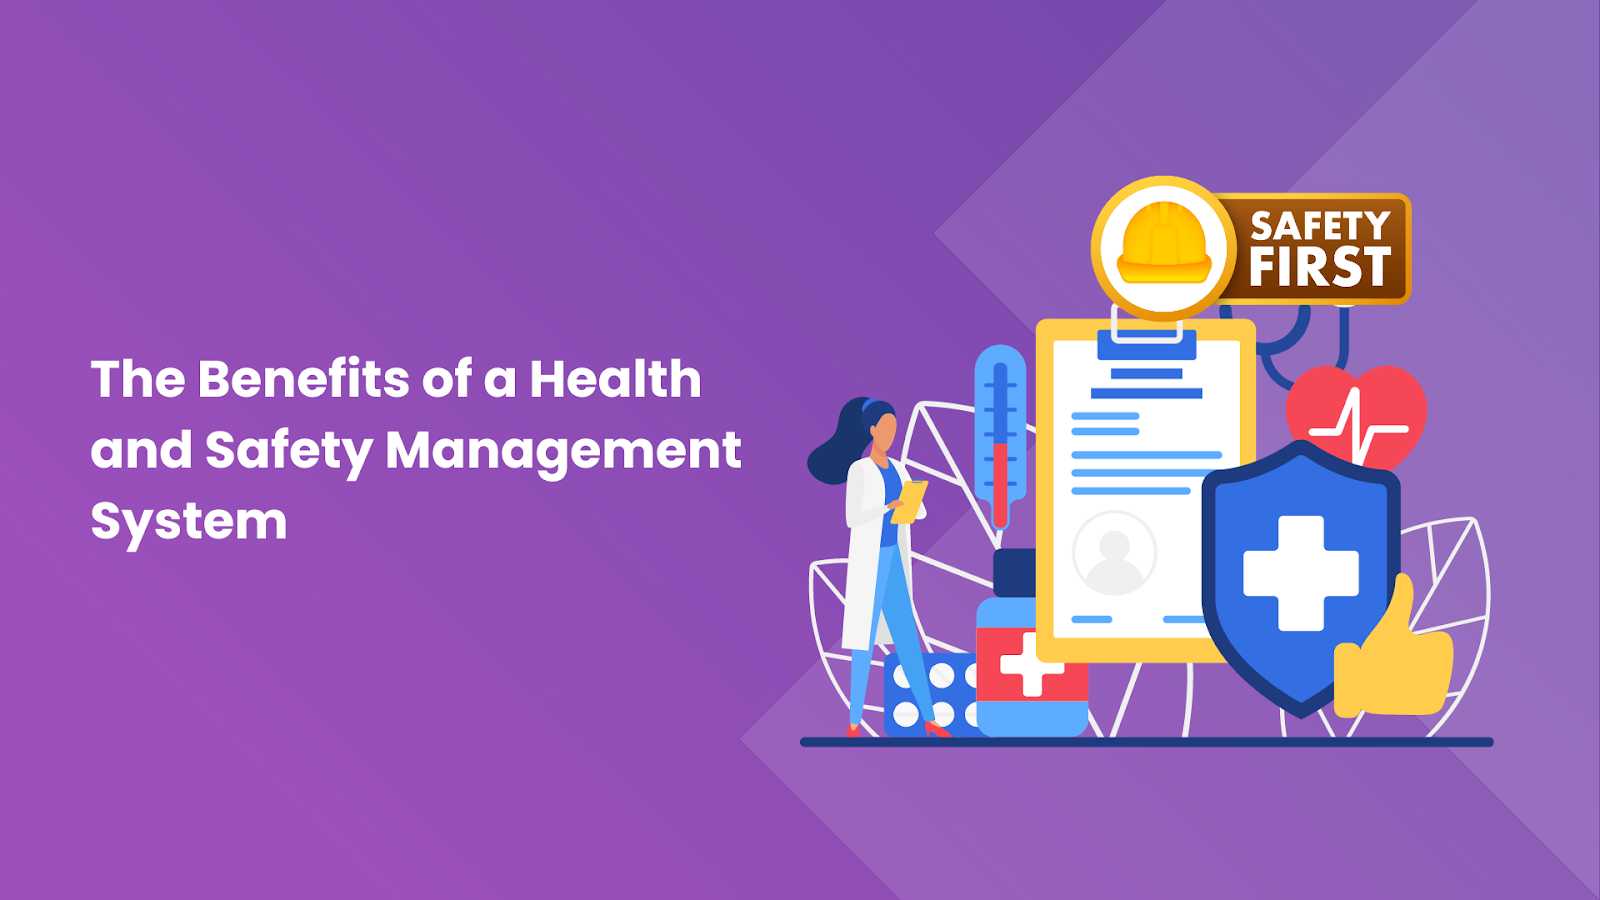 The Benefits of a Health and Safety Management System